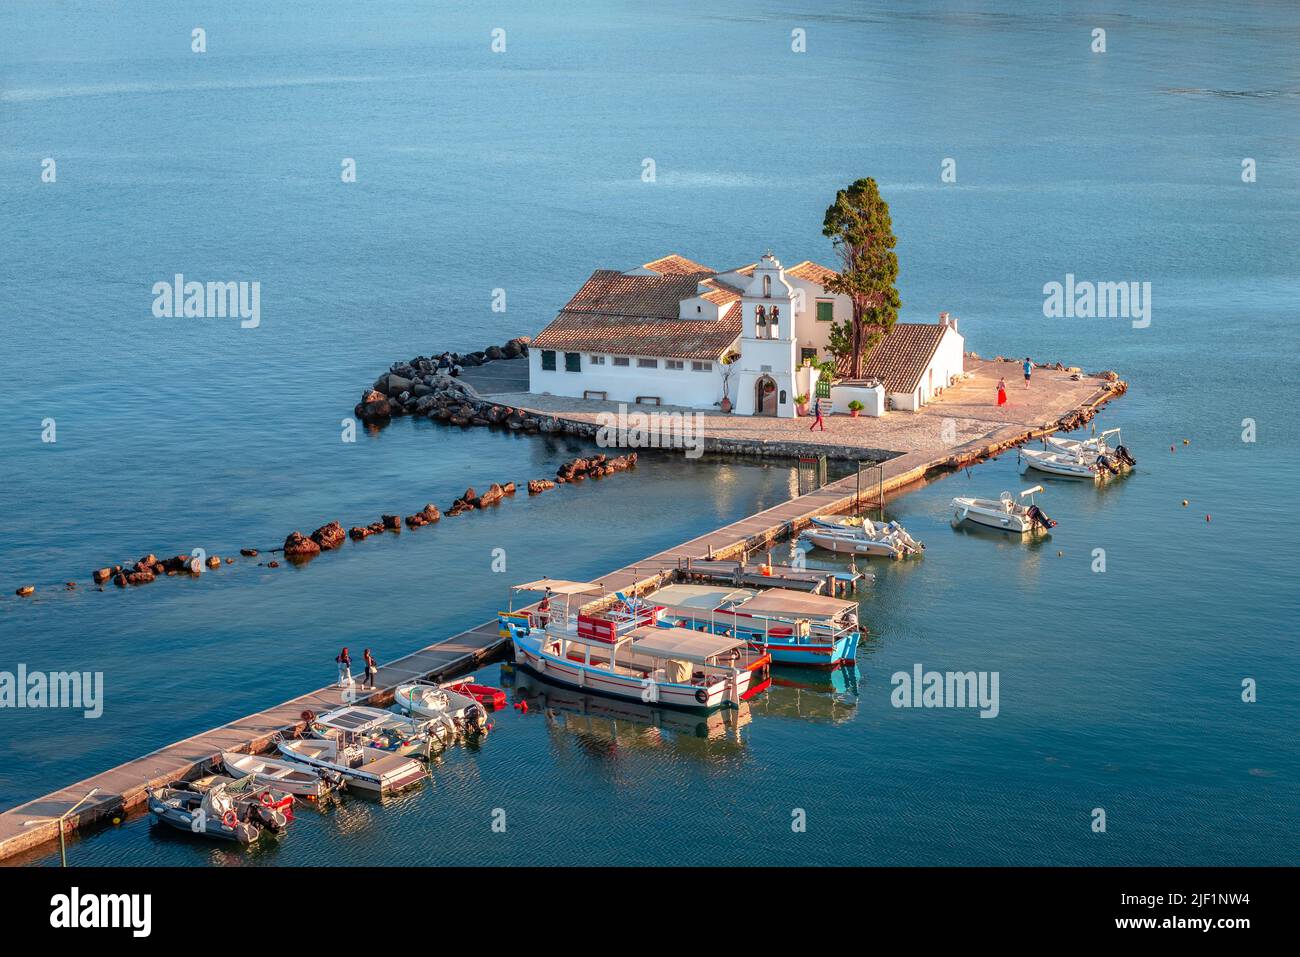 Corfu, Greece - June 2 2022: The Holy Monastery of Vlacherna, connected to the mainland by a pedestrian bridge, in Kanoni district. Stock Photo